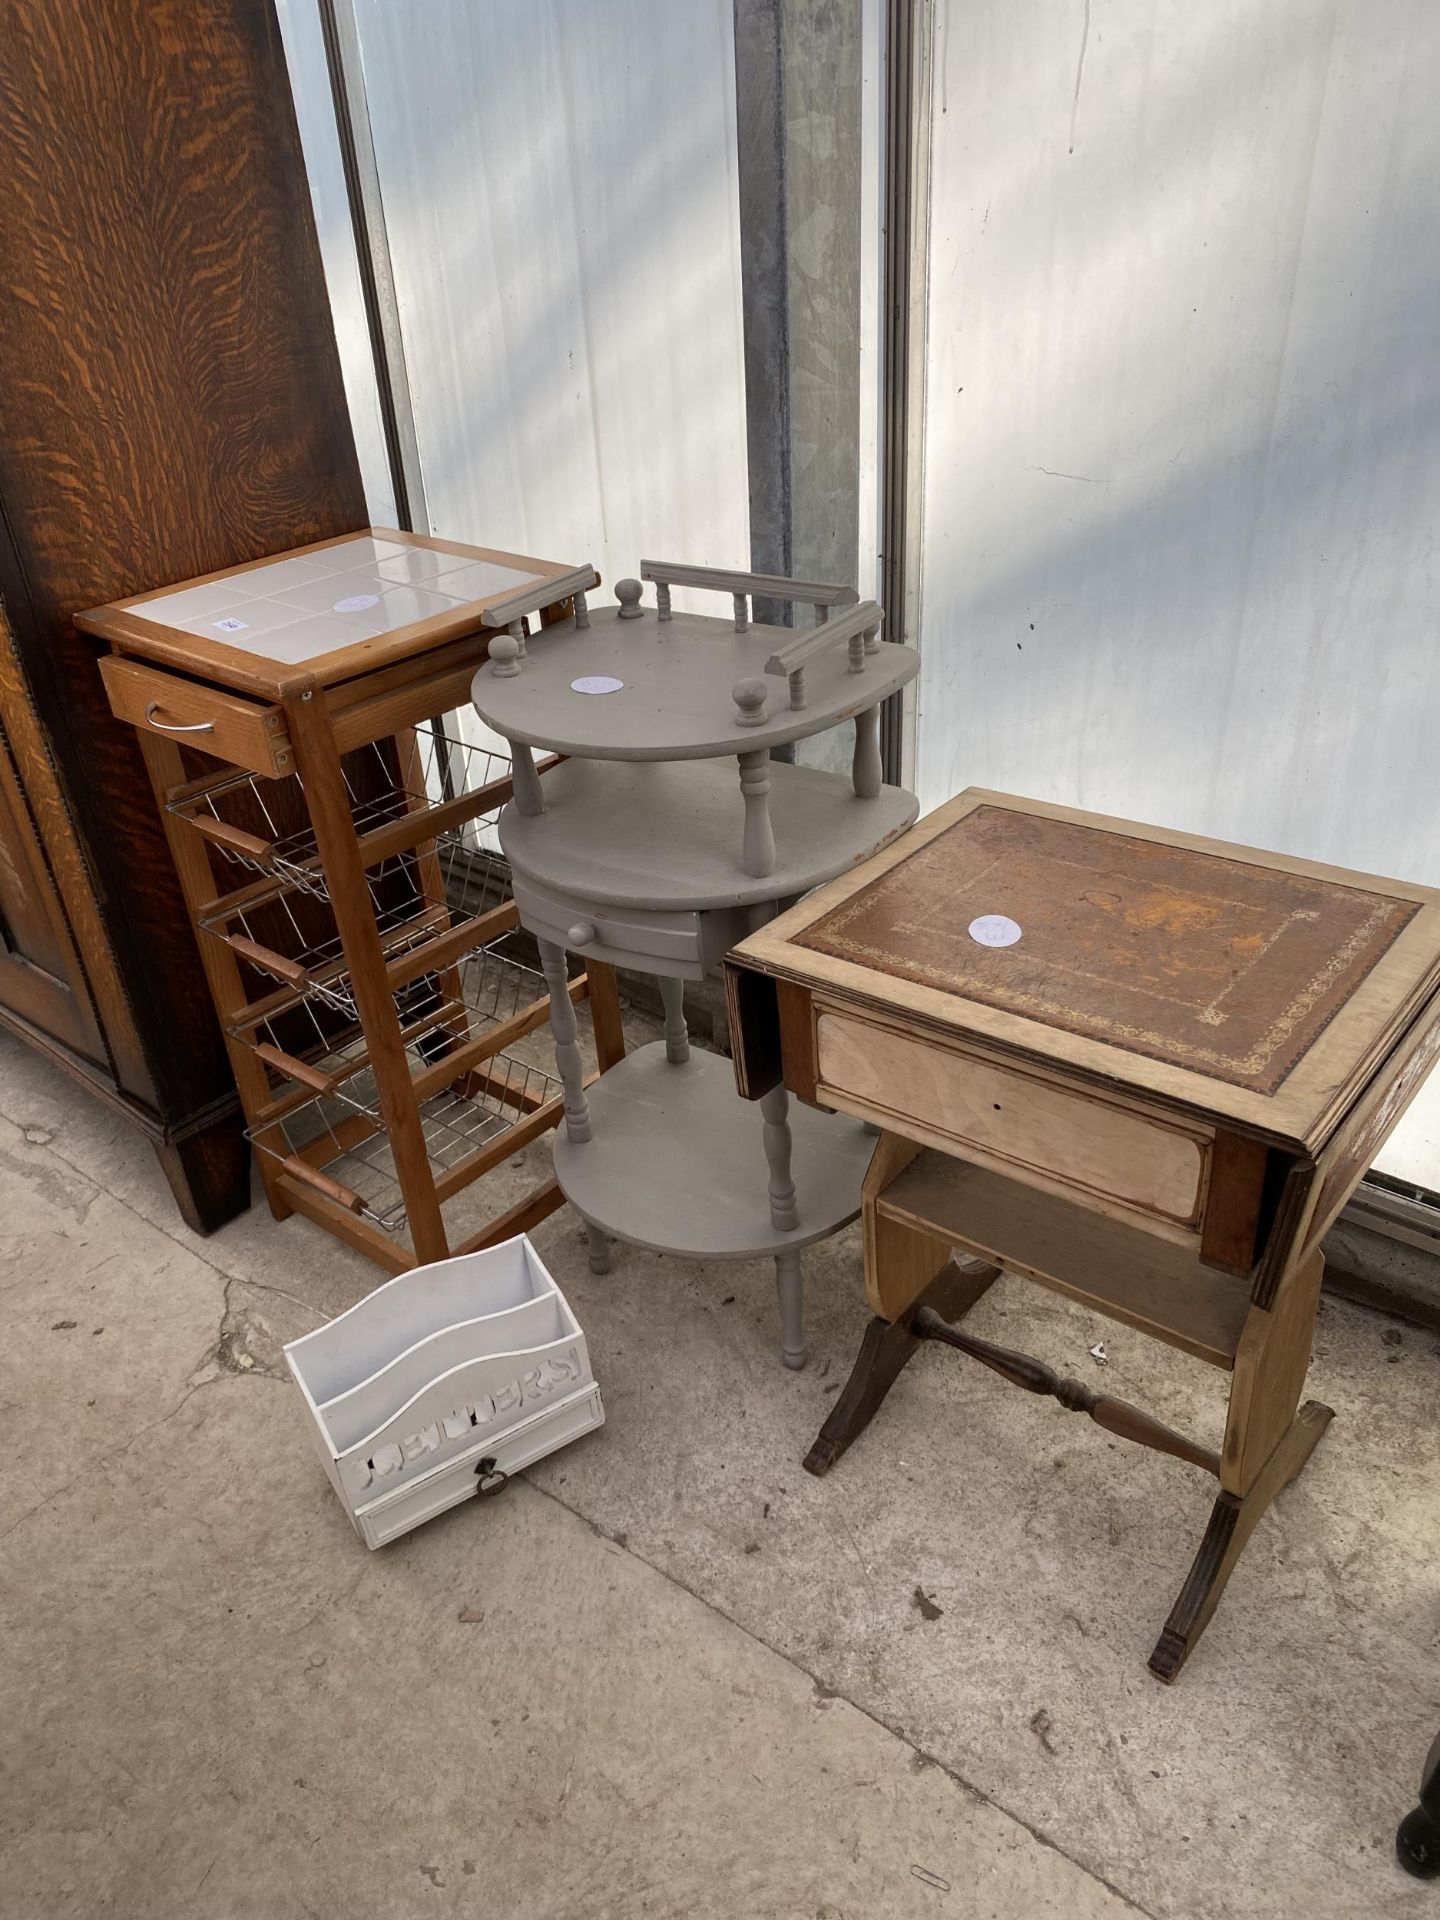 A MODERN TILED TOP KITCHEN RACK, TELEPHONE TABLE, LETTER RACK AND A SMALL DROP LEAF TABLE